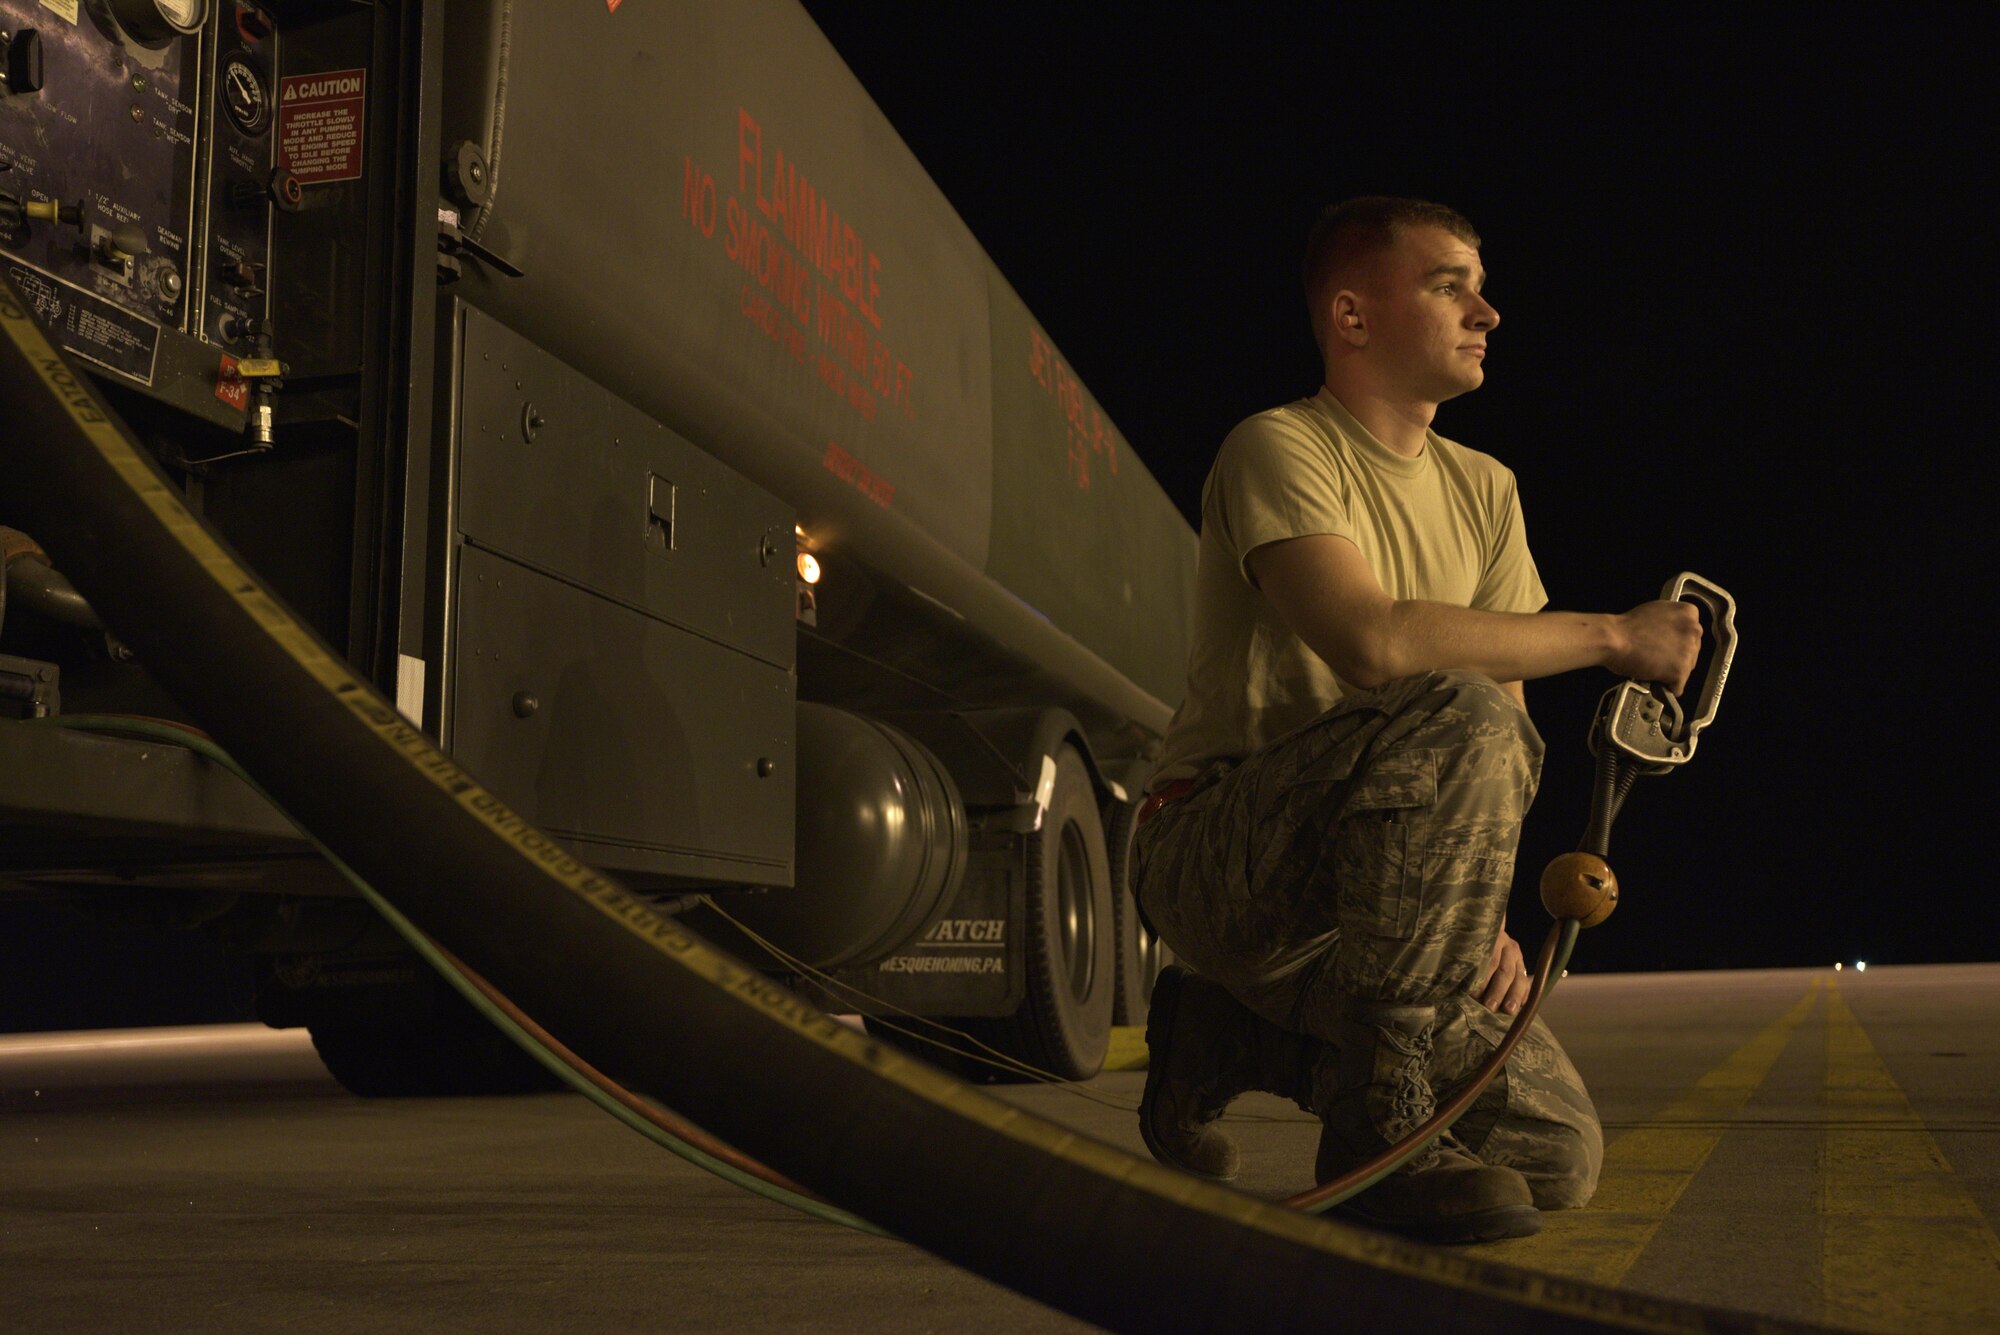 U.S. Air Force Airman 1st Class Andrew Chanders, 35th Logistics Readiness Squadron fuels distribution operator, pumps fuel into a RQ-4 Global Hawk at Misawa Air Base, Japan, Aug. 19, 2015. The RQ-4 has one of the highest endurance capabilities for unrefueled flight, with an ability to stay in the sky for more than 30 hours at a time on a full tank of fuel. (U.S. Air Force photo by Senior Airman Jose L. Hernandez-Domitilo/Released)